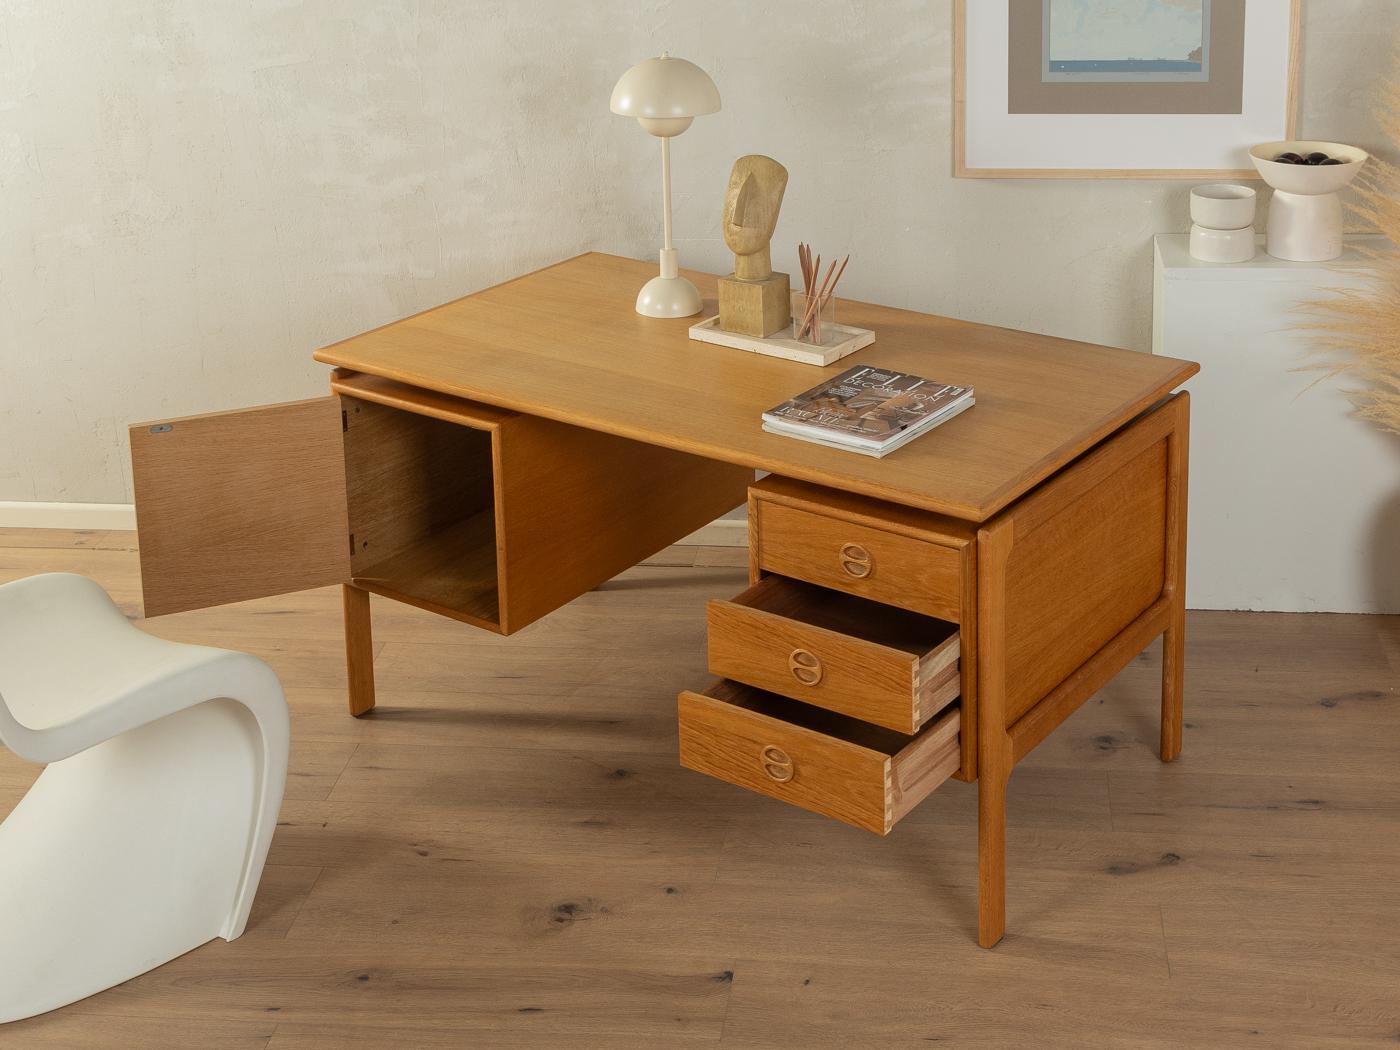 Classic freestanding desk from the 1960s by Arne Vodder. High-quality corpus in oak veneer with three drawers, one door, a floating table top and solid wood legs.
Quality Features:

    accomplished design: perfect proportions and visible attention